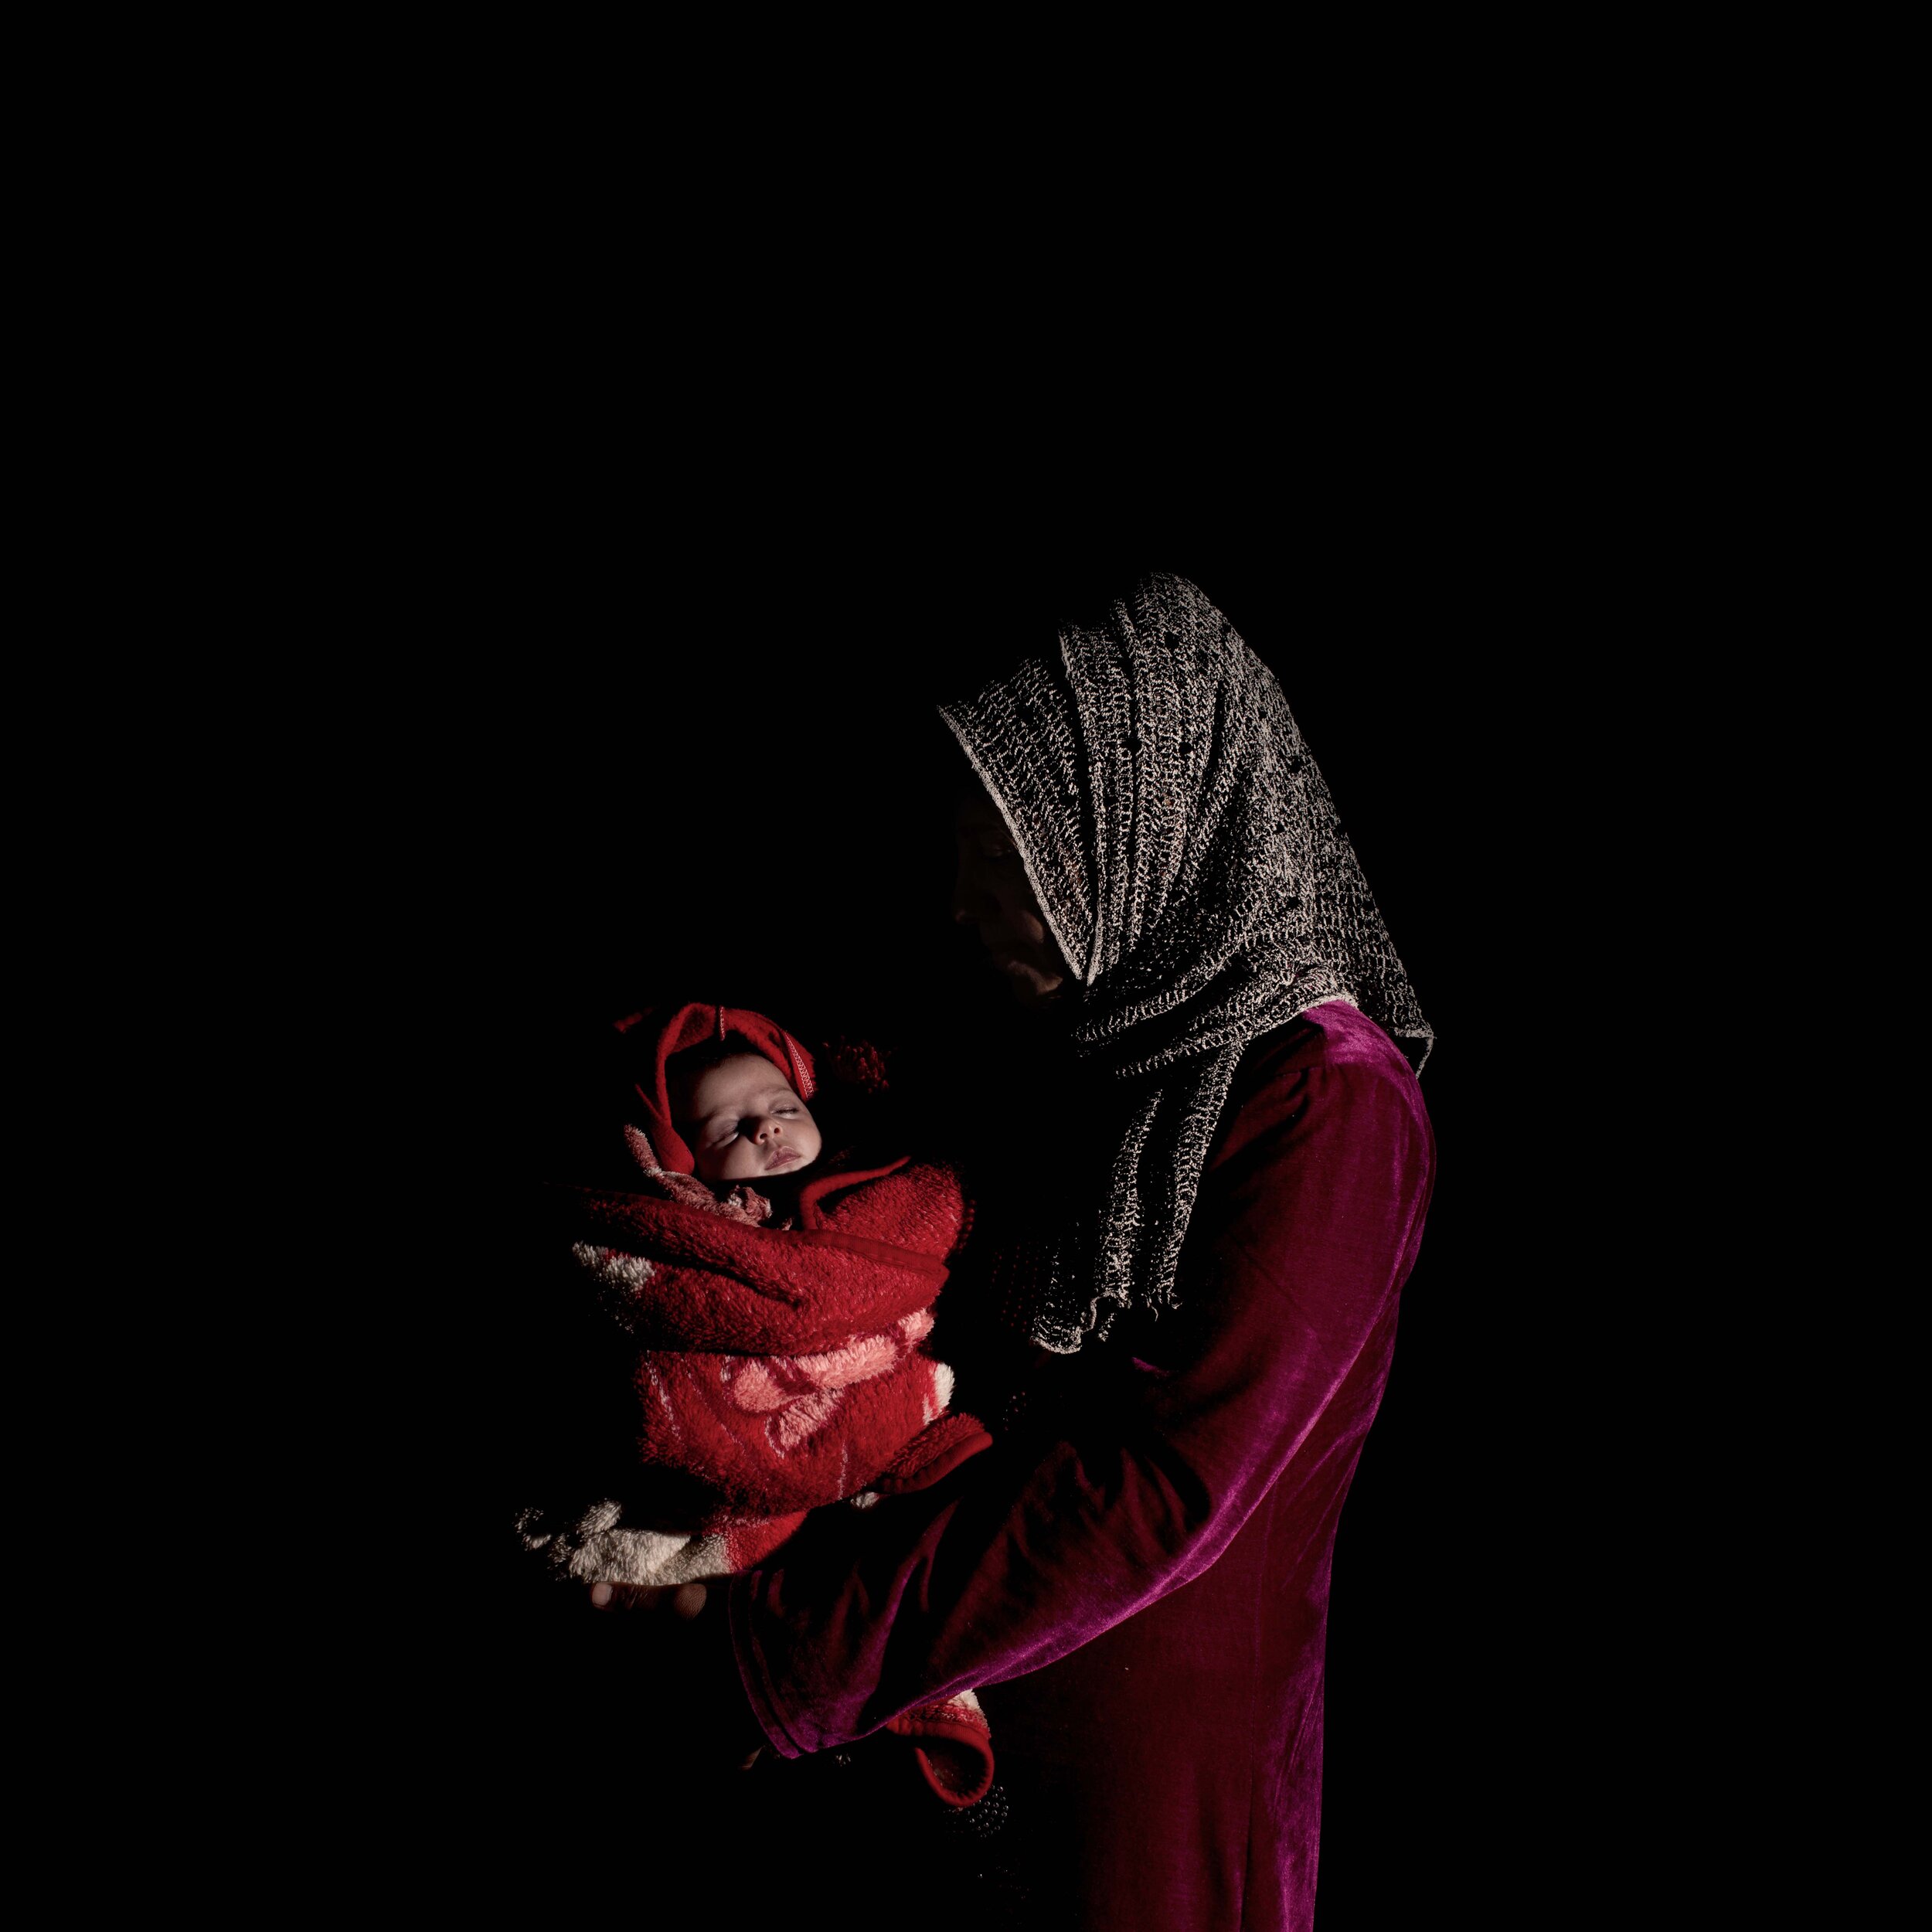  Hawle is from Aleppo and has five children, the eldest of which is six years old. Her youngest, Rahaf, is less than a month old. Her husband has been sick for some time and cannot afford medical attention. She is in the process of registering the bi